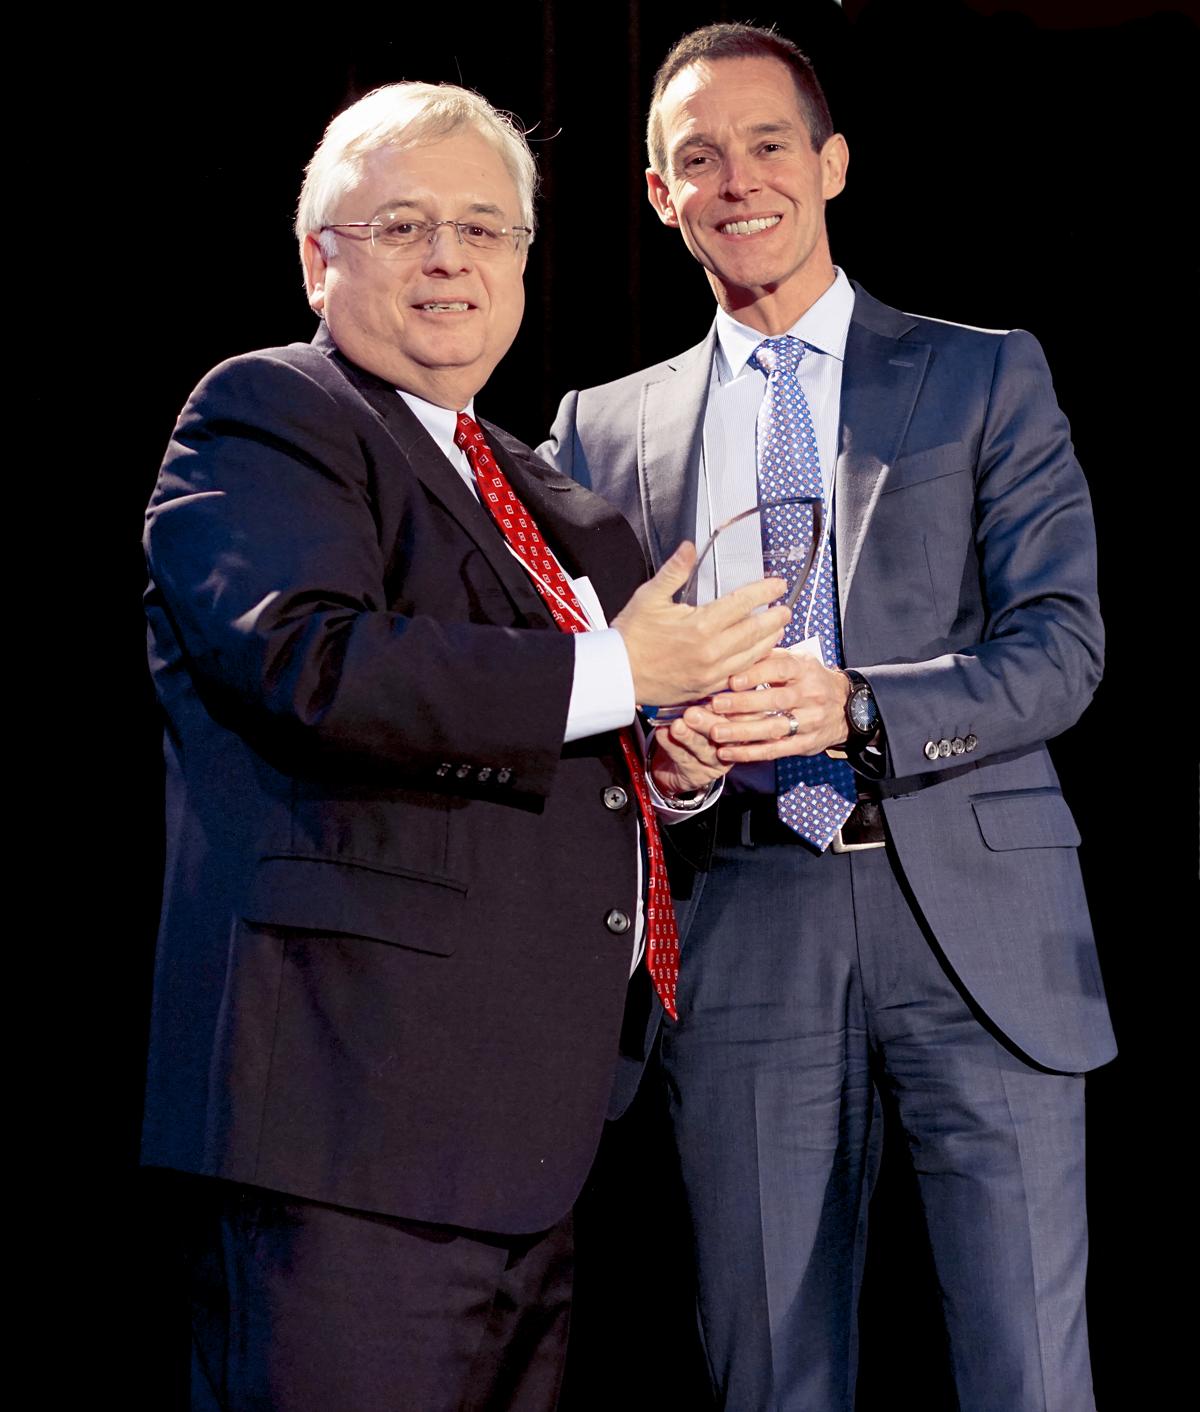 Richard Dixon, Vice President and Human Resources Officer of NAV CANADA, is presented the C.M. Hincks award by Peter Coleridge, CEO of the Canadian Mental Health Association at the 12th annual Bottom Line Conference, Tuesday, Feb. 24 at the Vancouver Convention Centre.